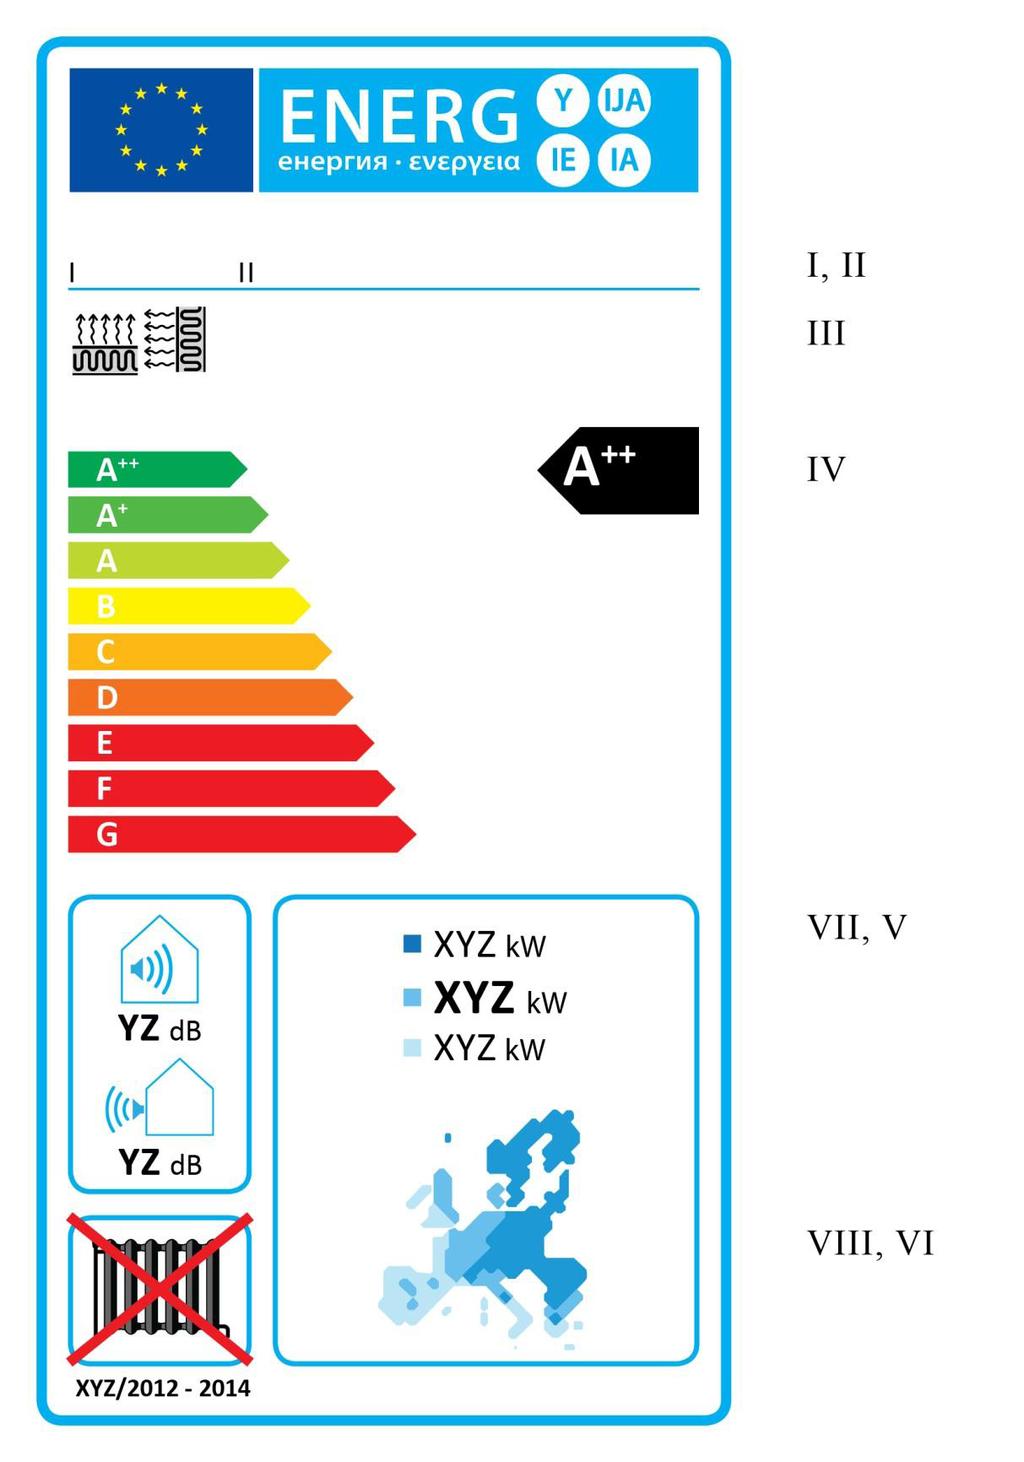 similarly to the label for air to air heat pumps, however, these are not indicated by the label in its current design.